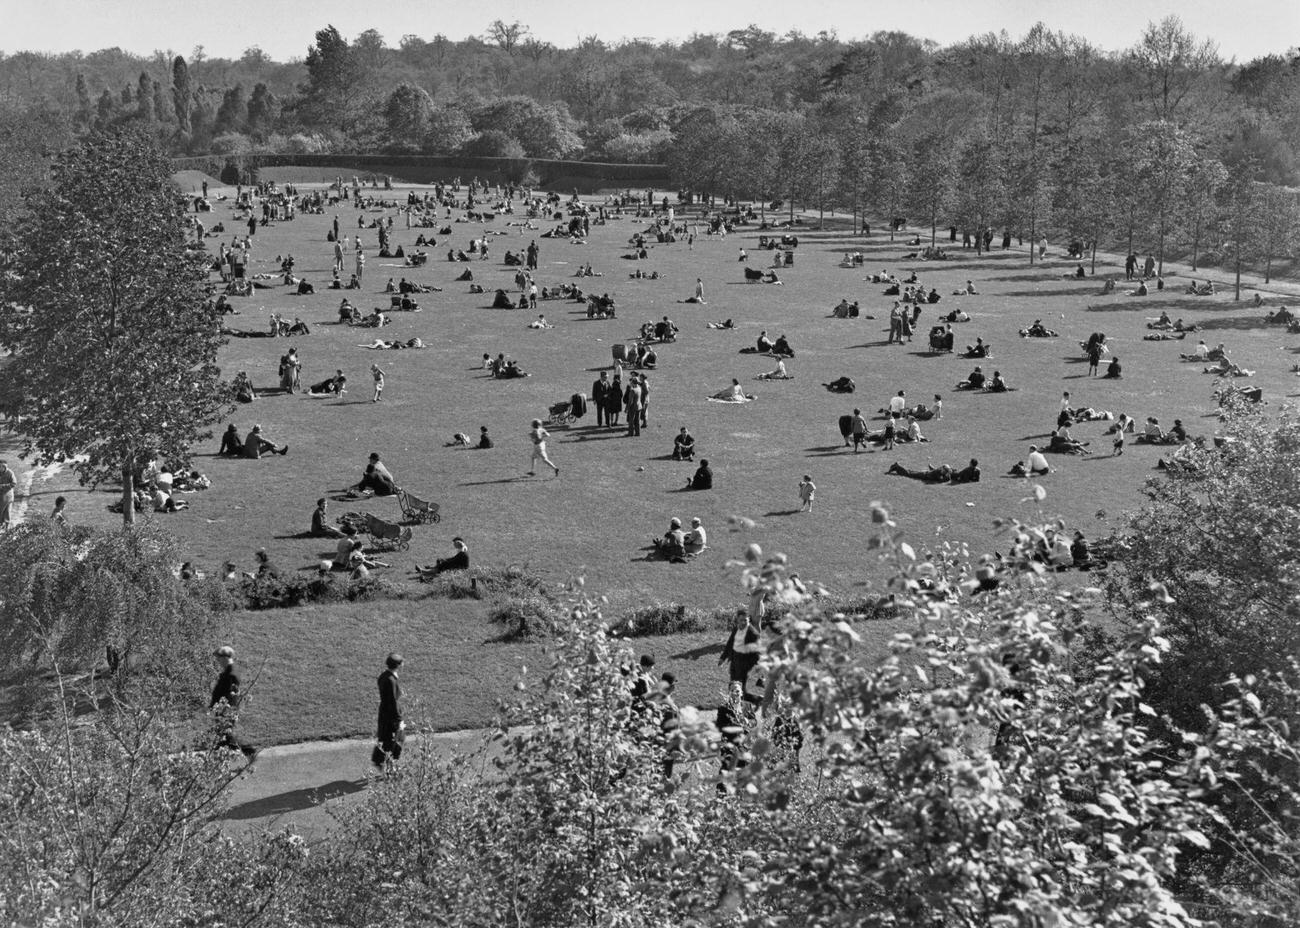 New Yorkers Relaxing In Prospect Park, Brooklyn, 1944